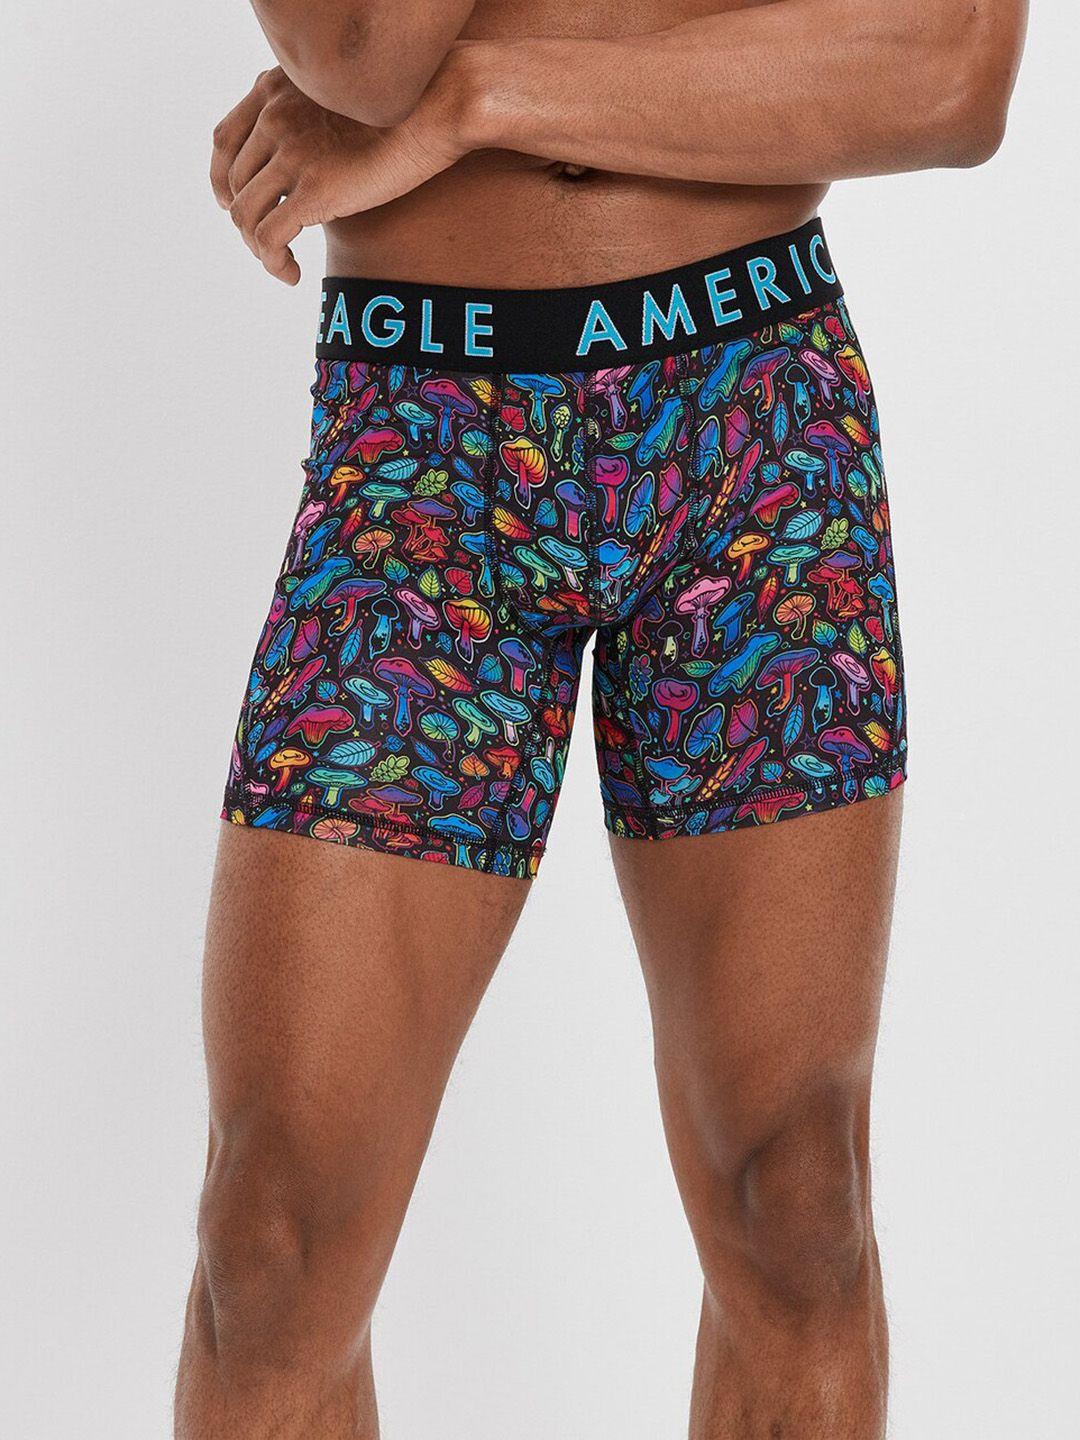 american eagle outfitters mushroom printed boxer-style brief wes0233010001